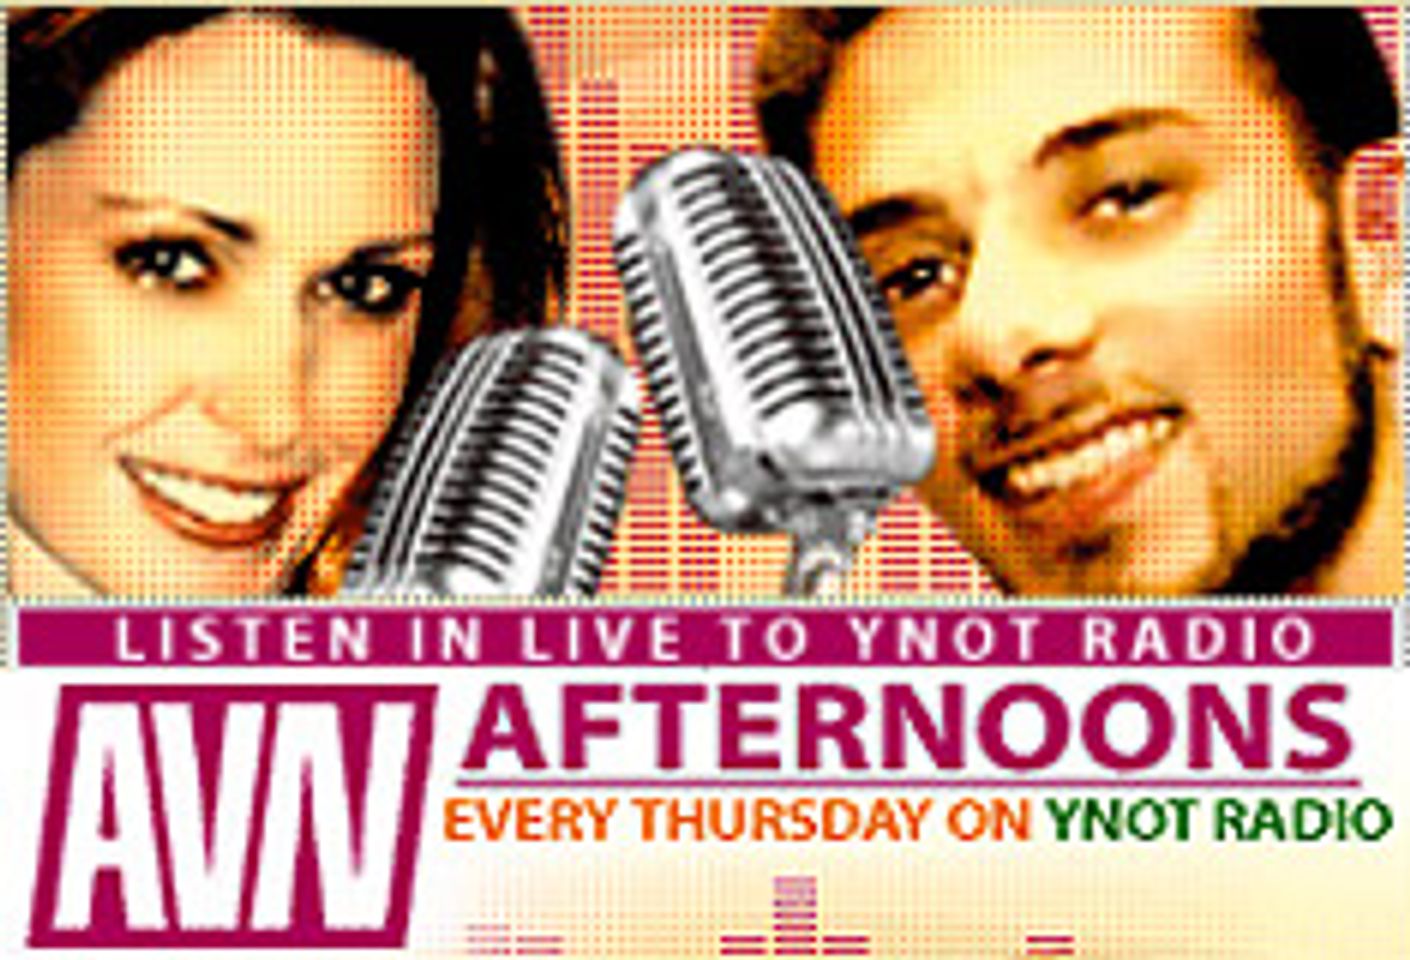 Wicked Founder to be Featured on 'AVN Afternoons'